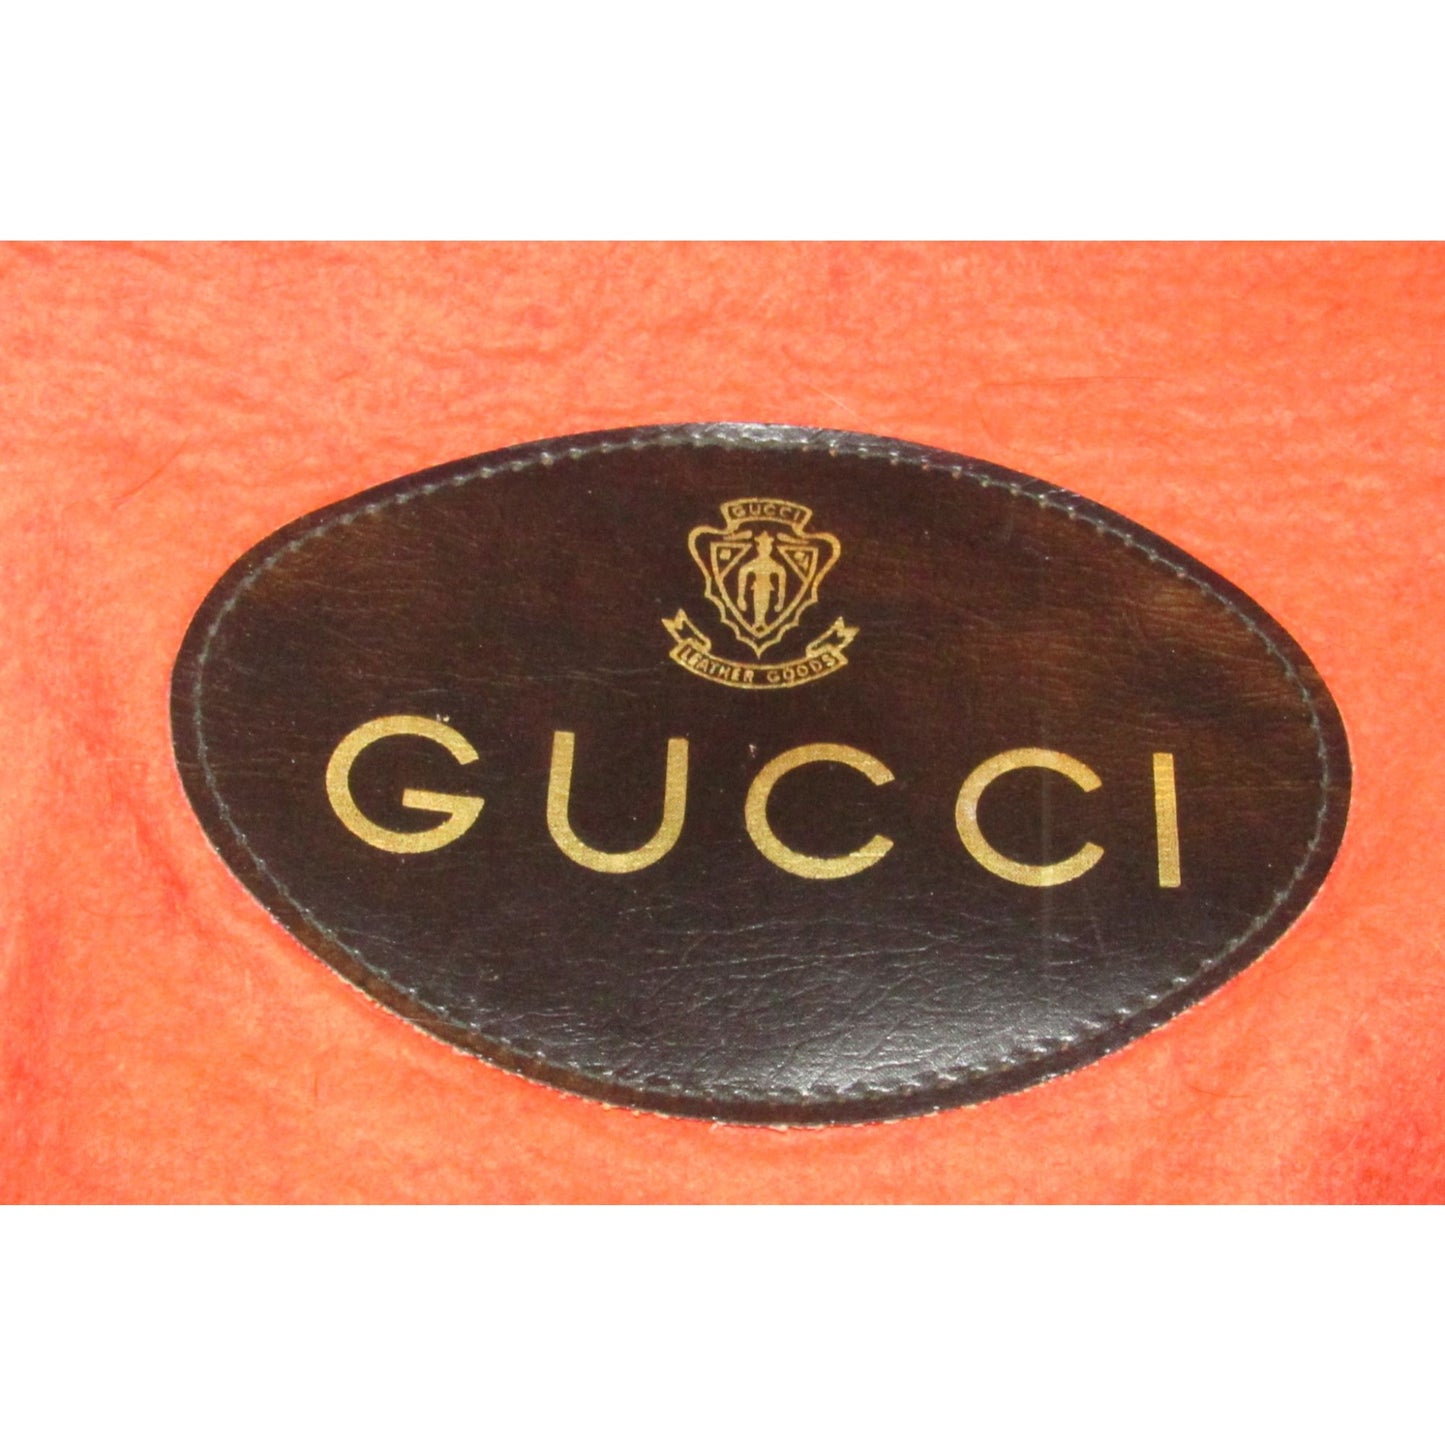 Vintage, Gucci, red soft wool & black leather, large tote with a leather oval with 'GUCCi' and the crest accent at the center